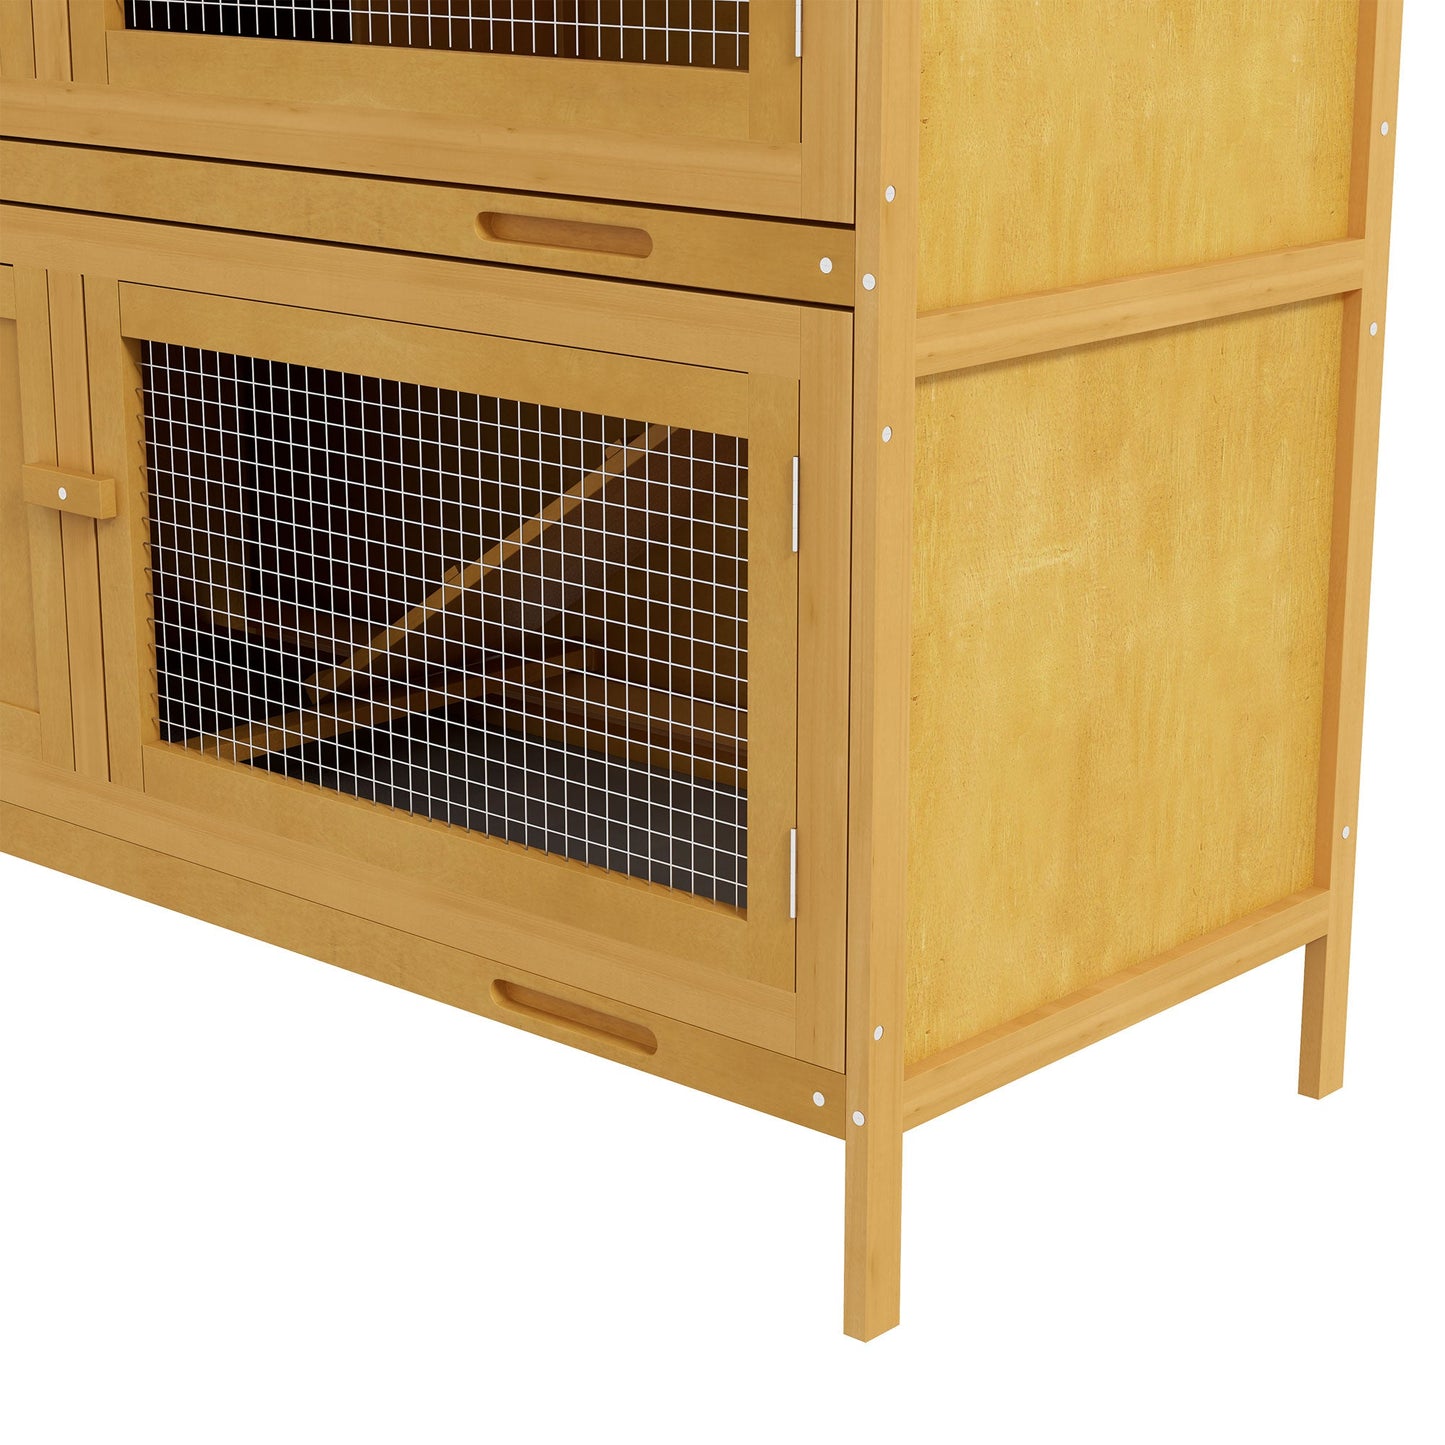 Wood Rabbit Hutch with 2 Large Main House, Ramp, Trays, Yellow at Gallery Canada